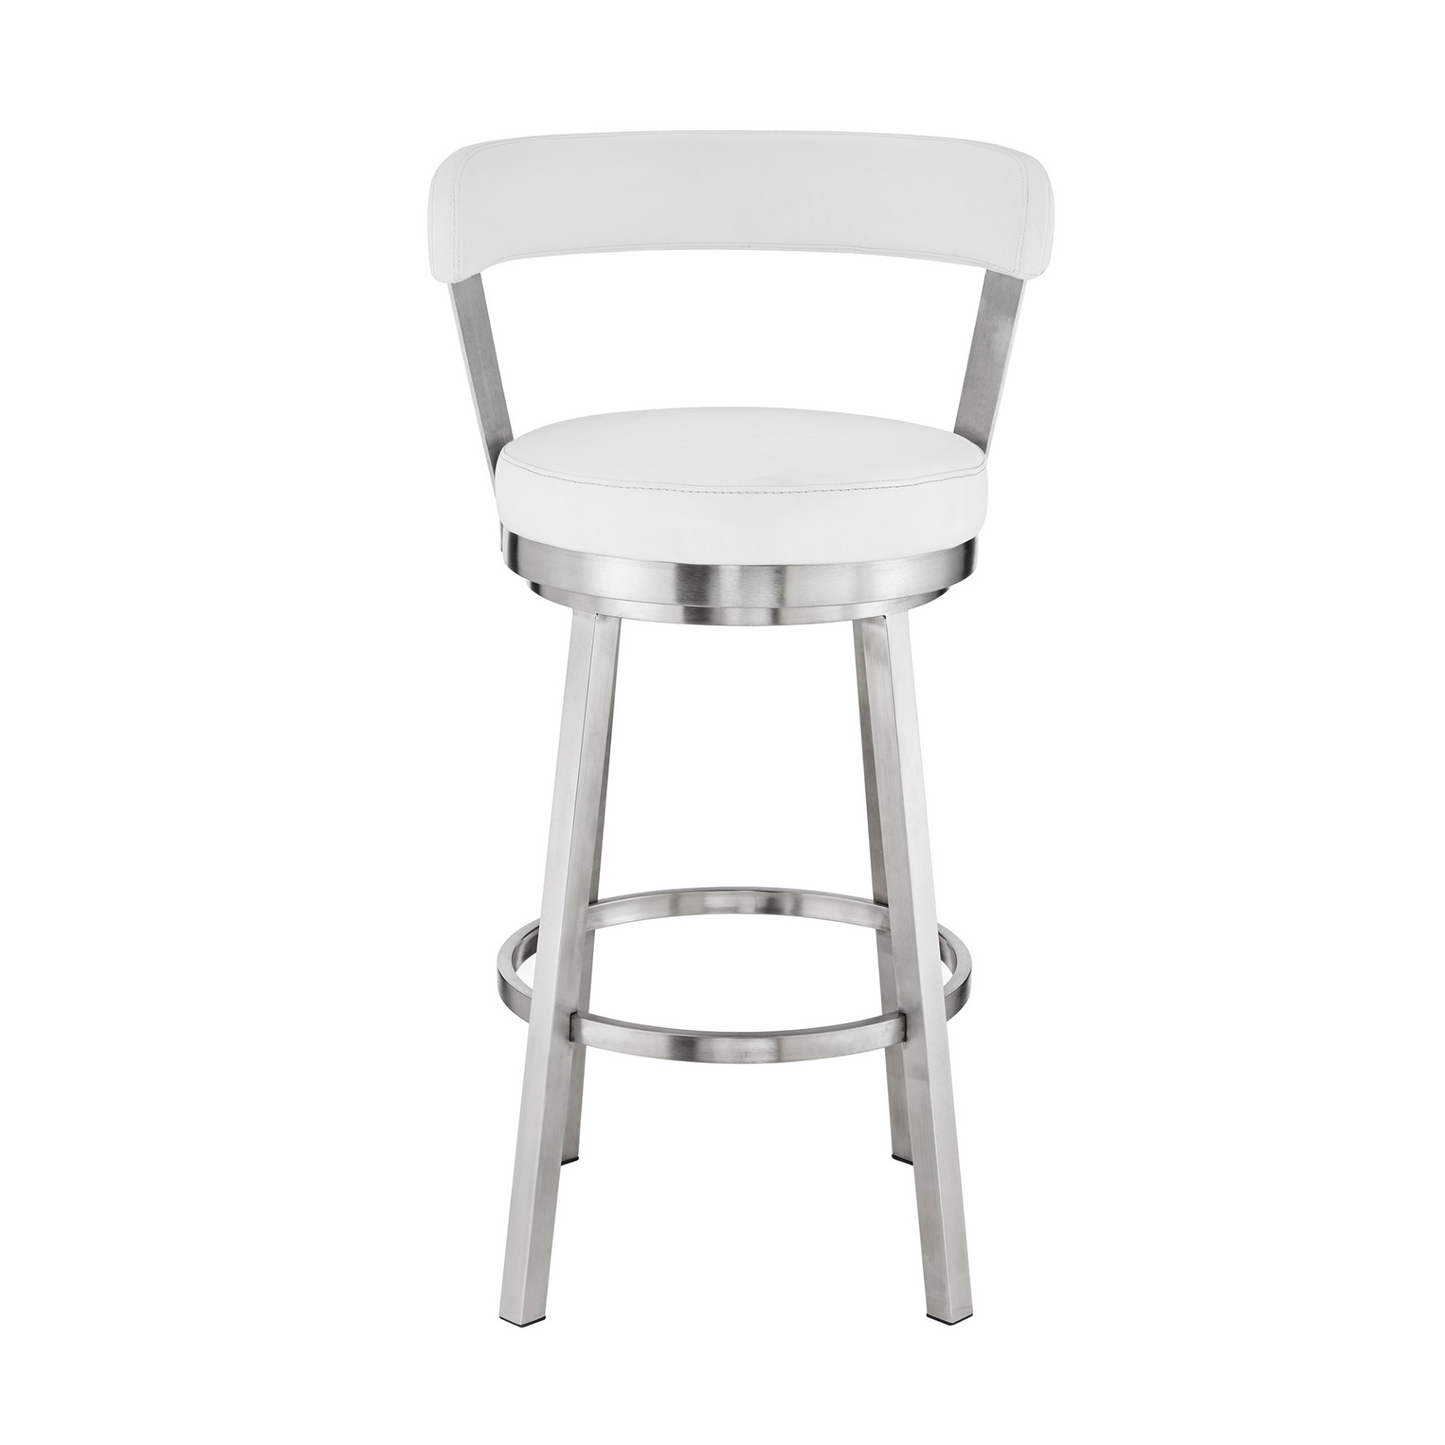 "26"" Chic White Faux Leather with Stainless Steel Finish Swivel Bar Stool"